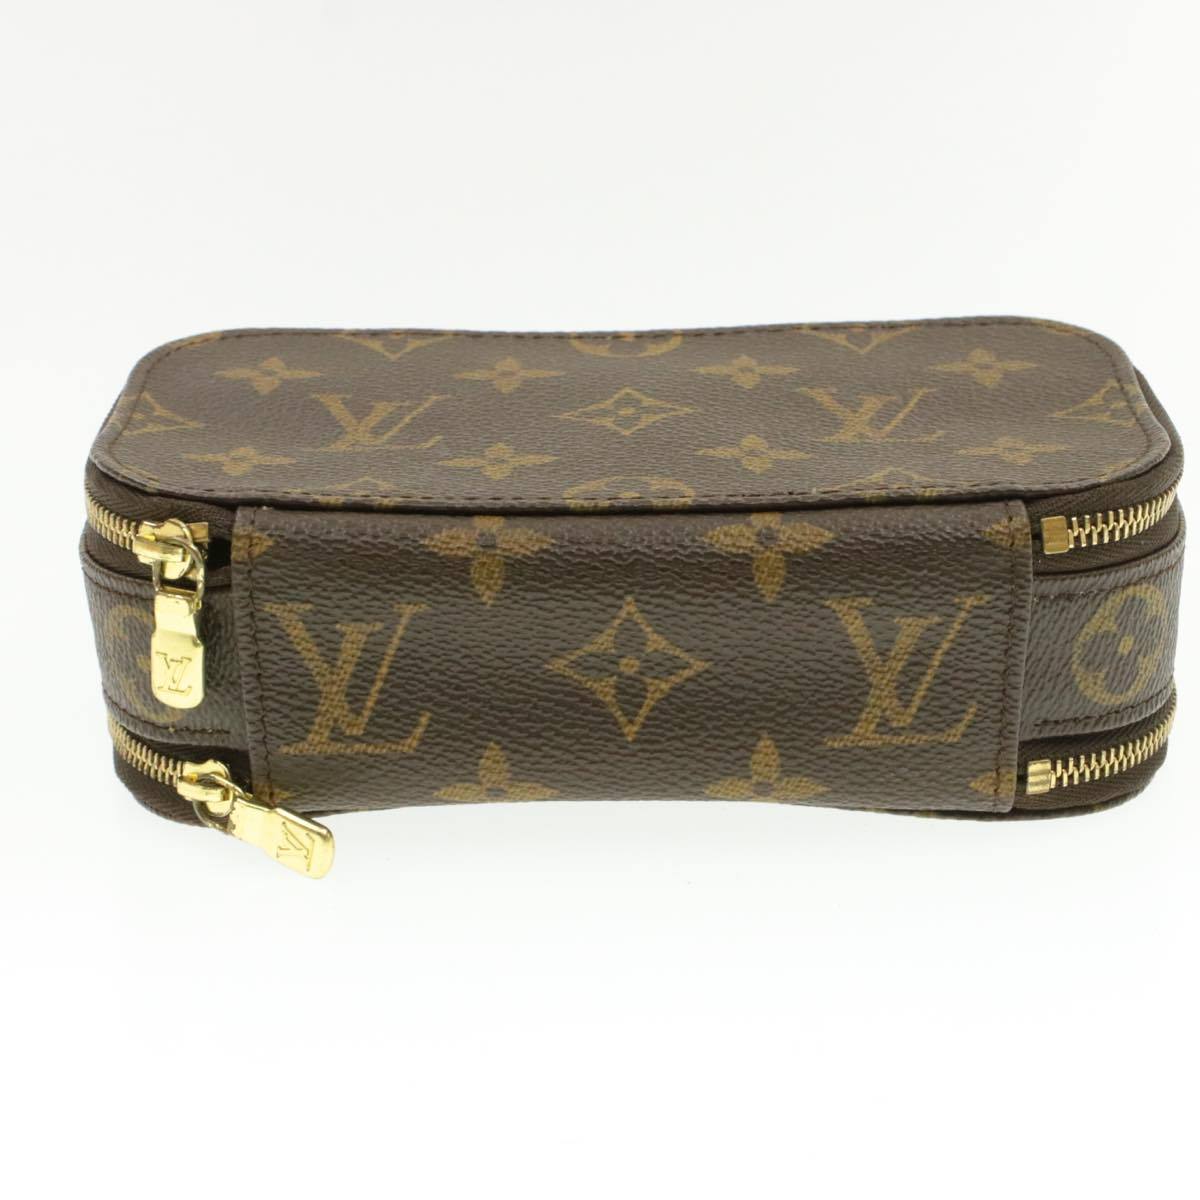 LOUIS VUITTON MONOGRAM COSMETIC POUCH PM REVIEW & WHAT FITS INSIDE 